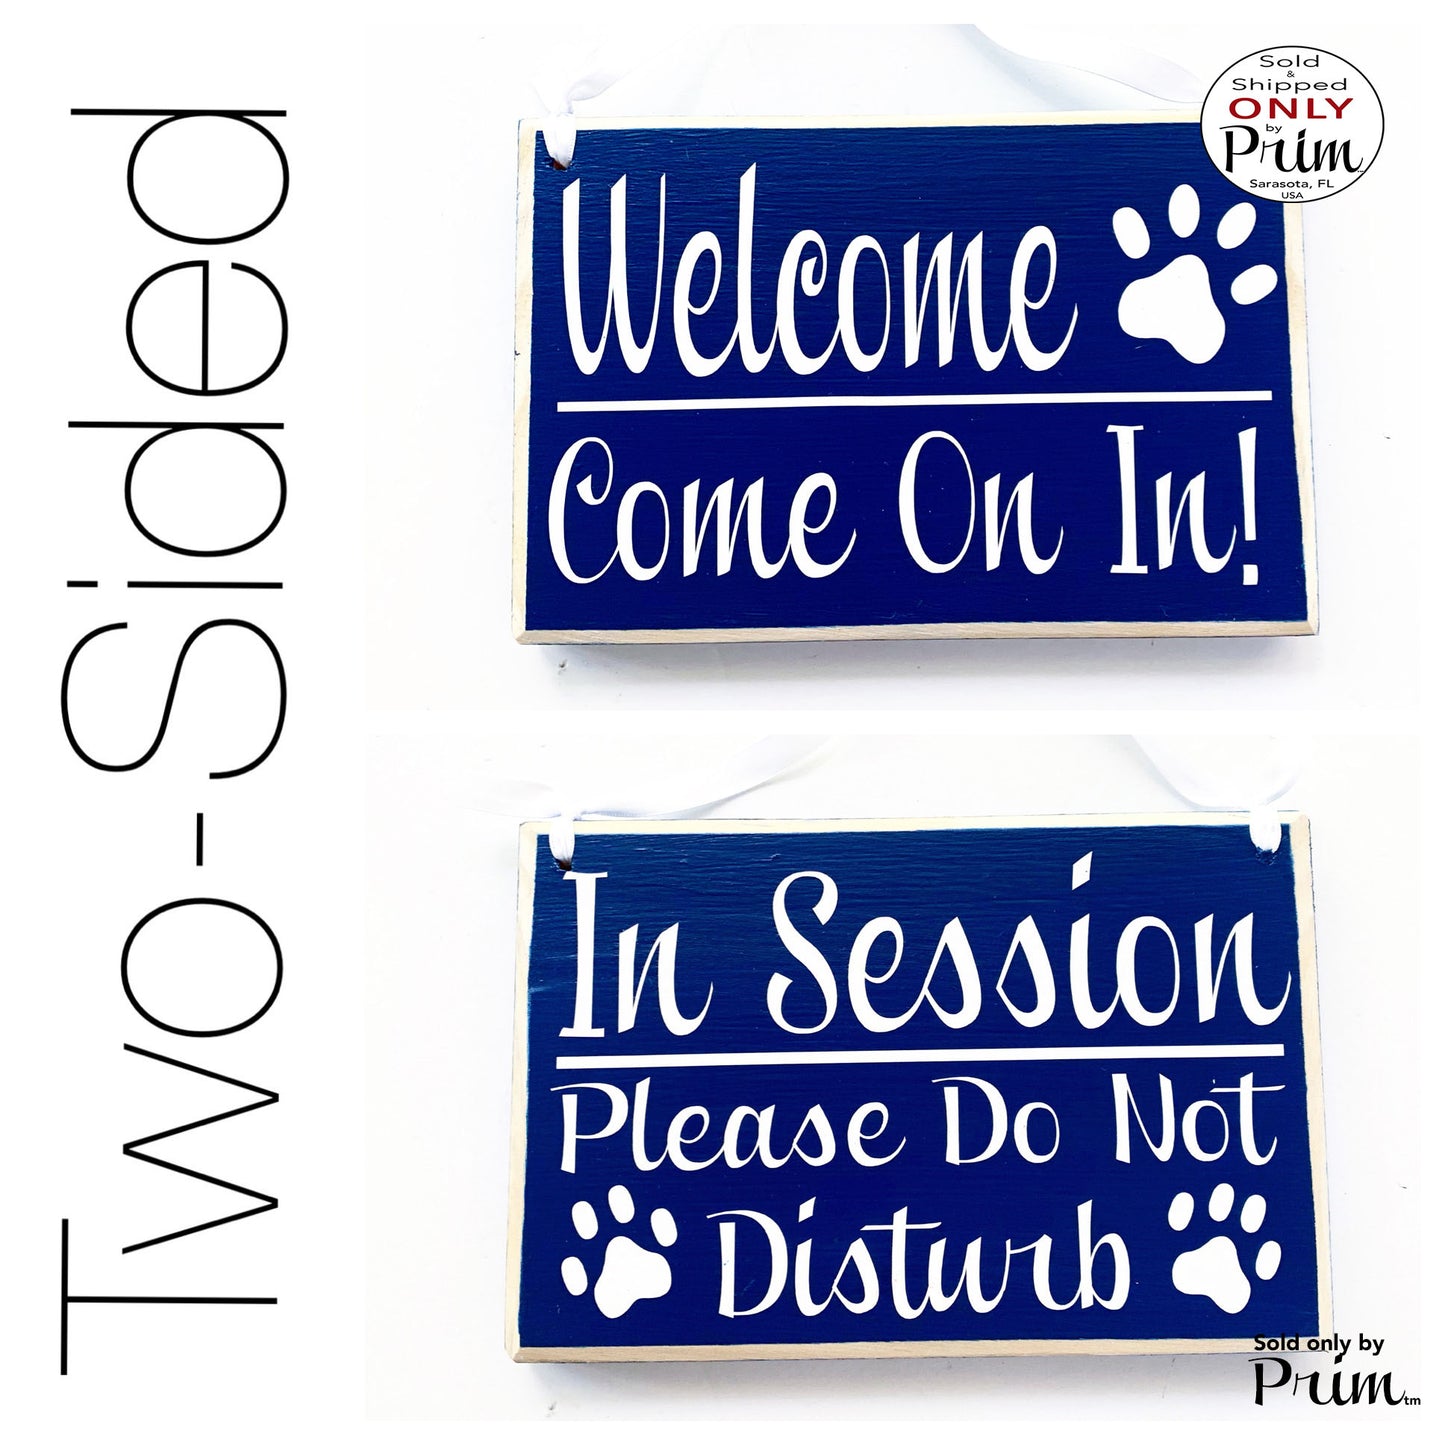 8x6 Animal Paws In Session Please Do Not Disturb / Welcome Come on in Custom Wood Sign Two Sided Dog Cat Humane Society Door Wall Plaque Designs by Prim